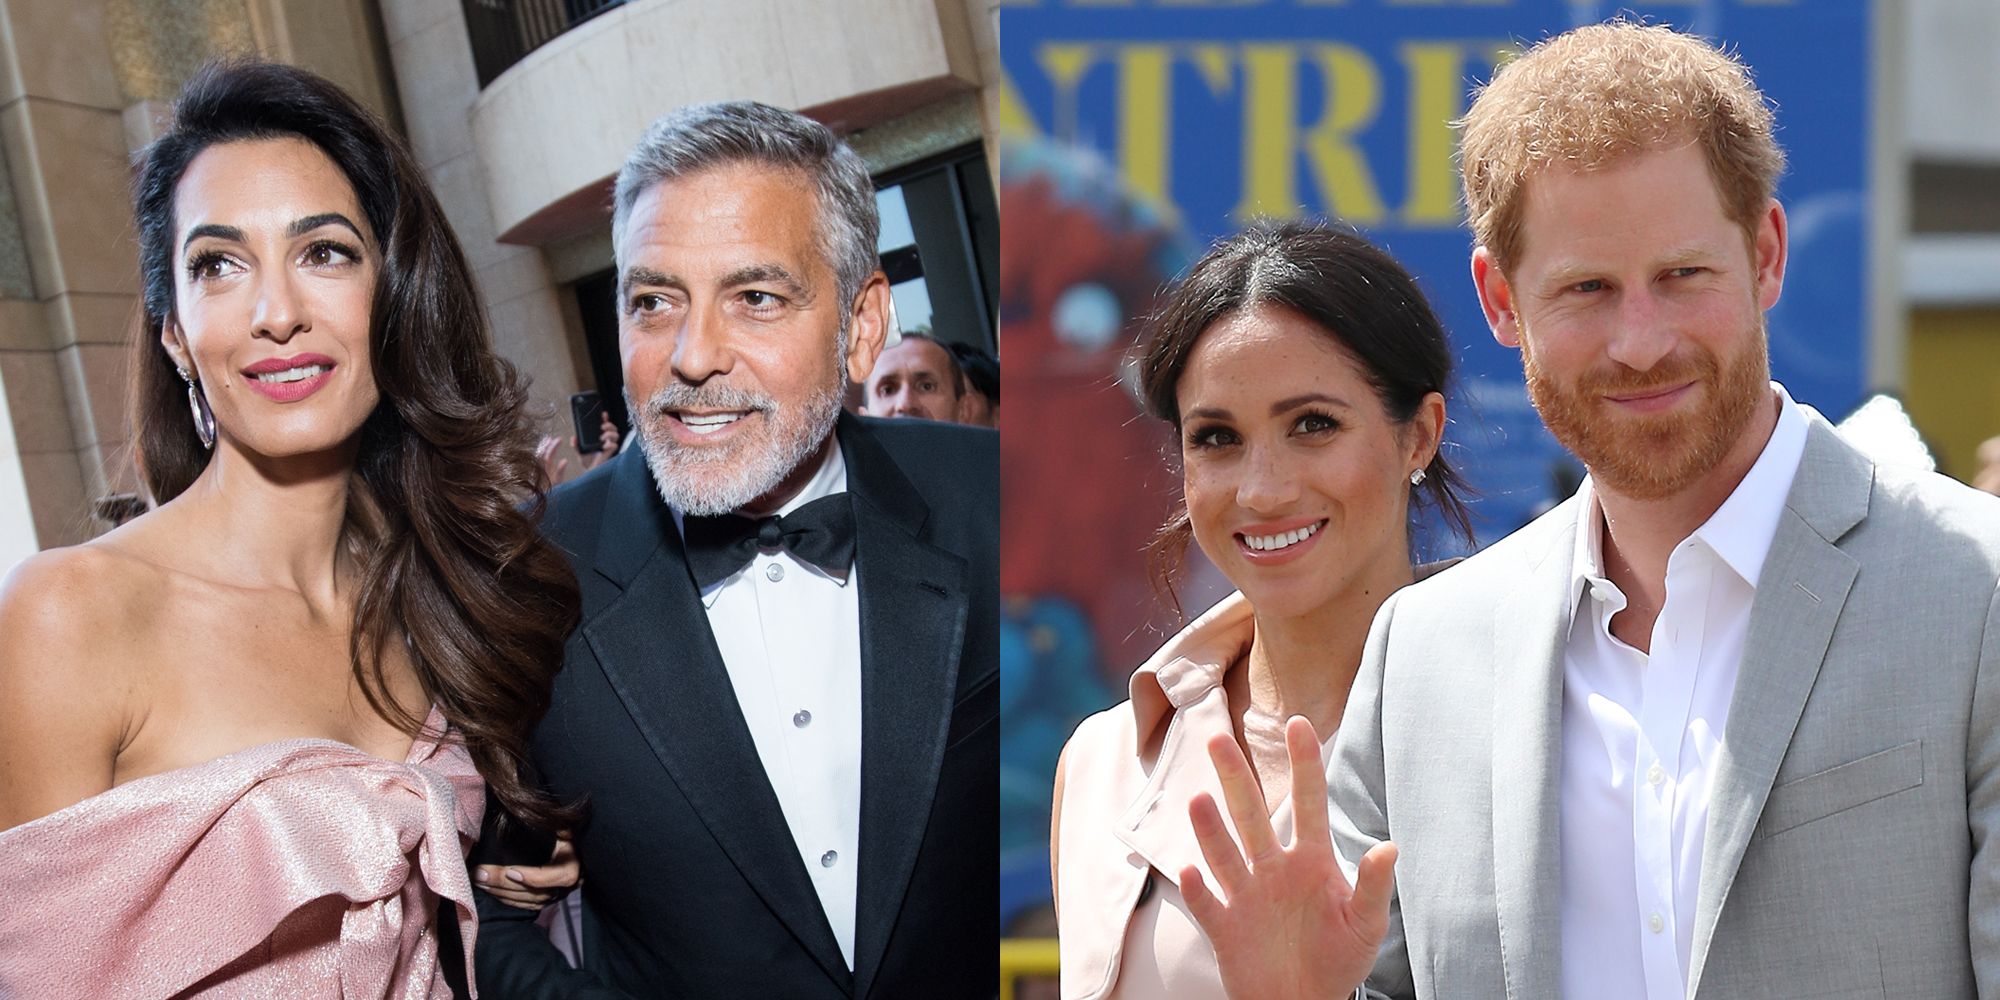 George and Amal Clooney and Prince Harry and Meghan Markle